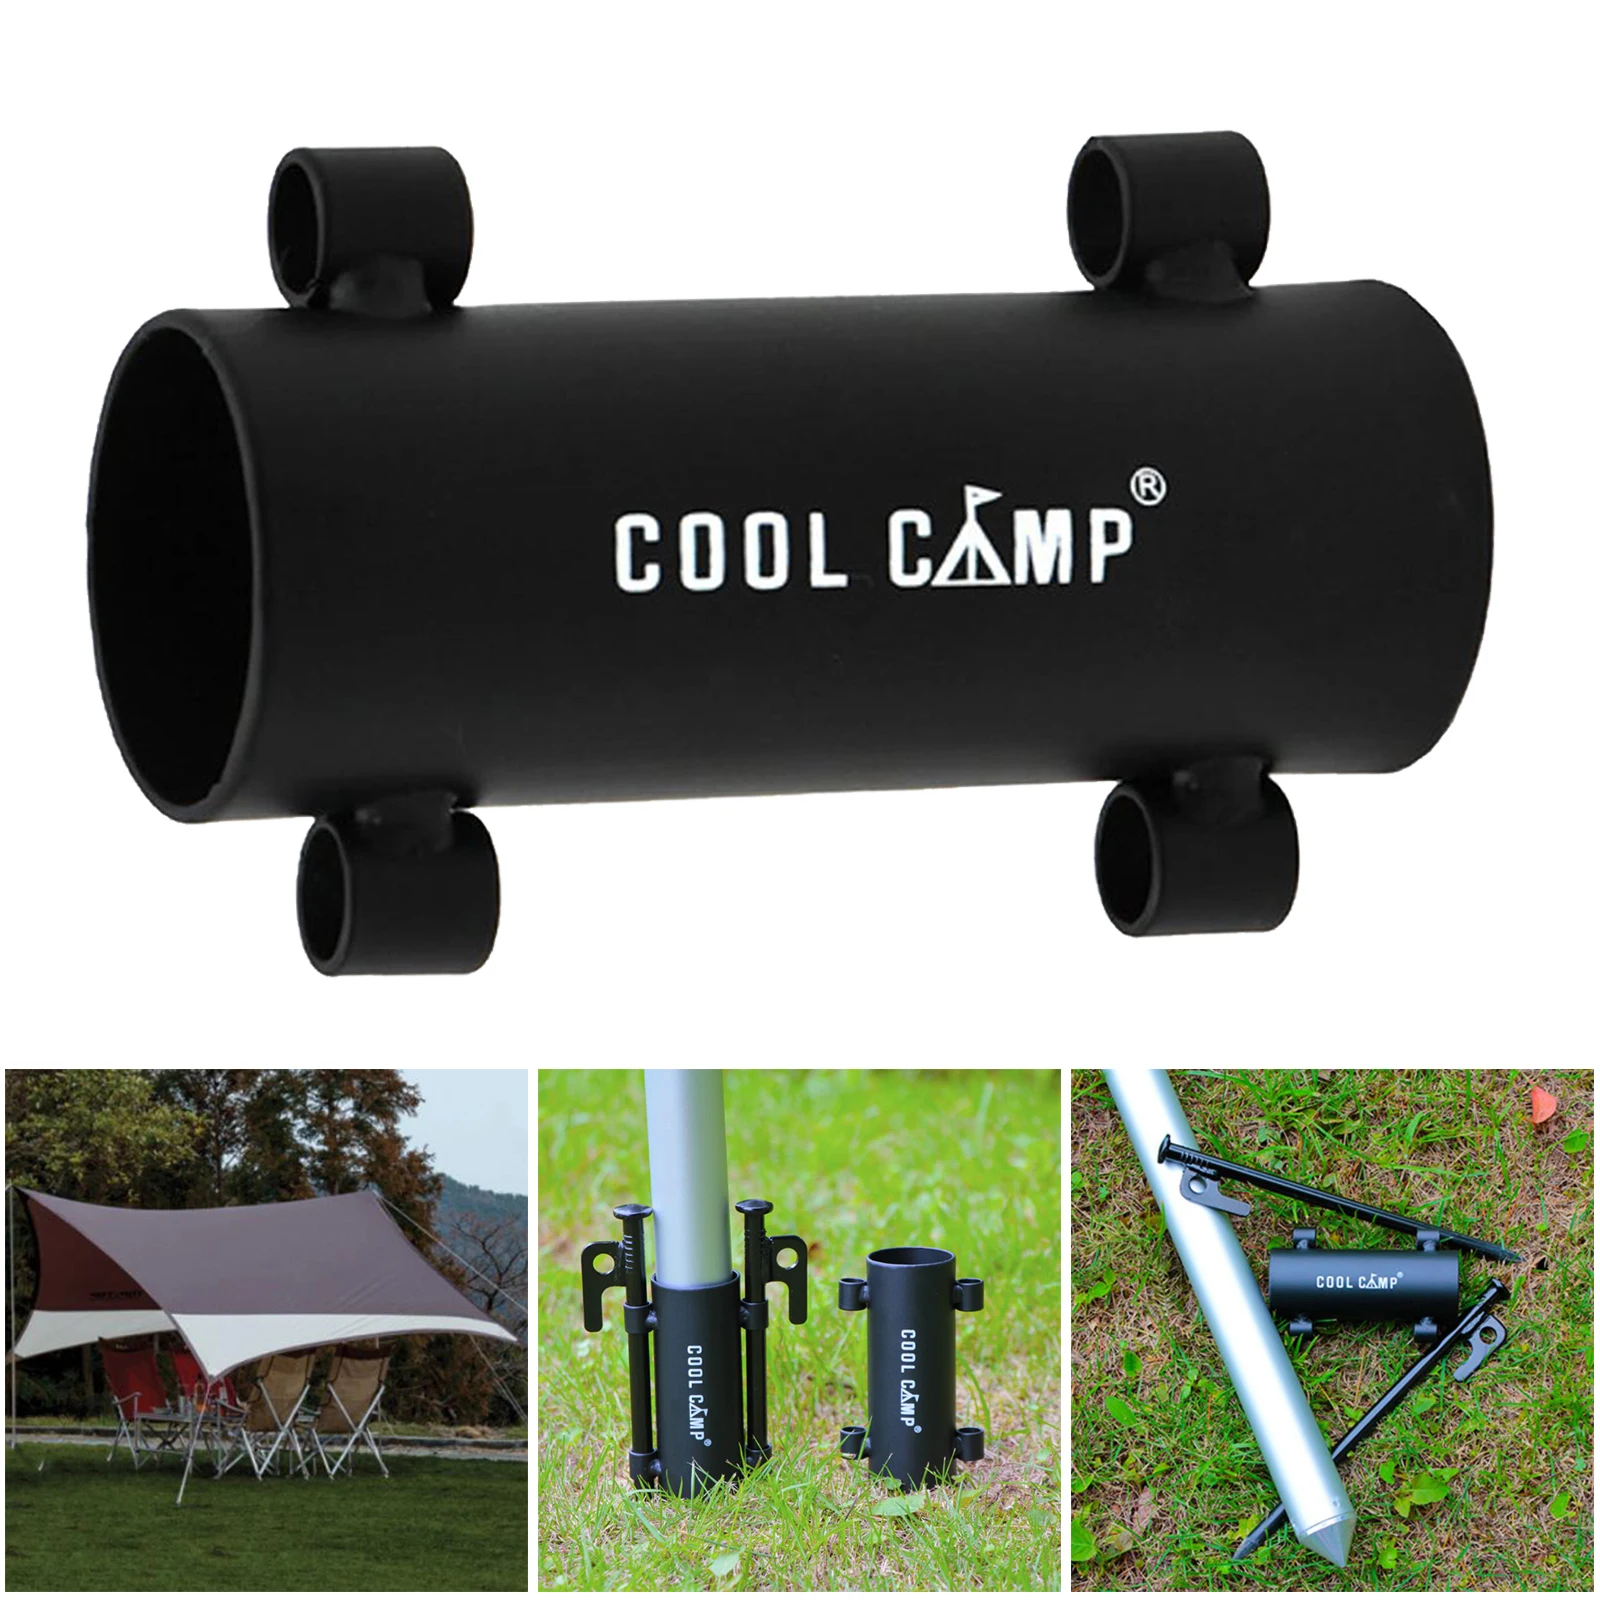 Iron Canopy Pole Holder Awning Tarp Tent Building Rod Support Stand Holder